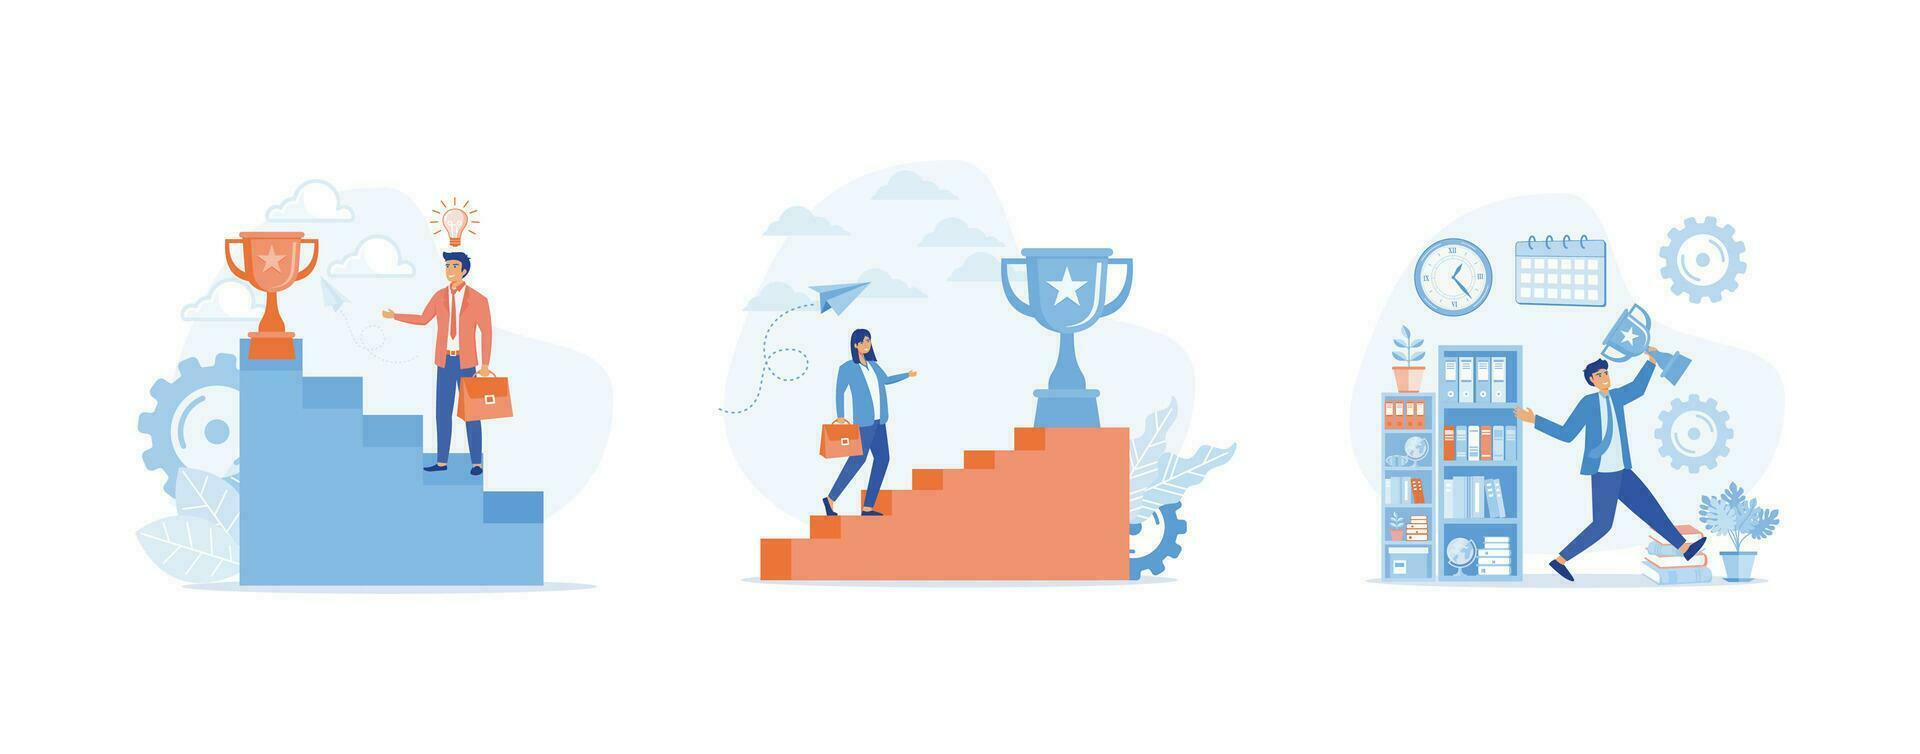 Business people holding trophy cup standing on the stair. Success and professional achievement, set flat vector modern illustration